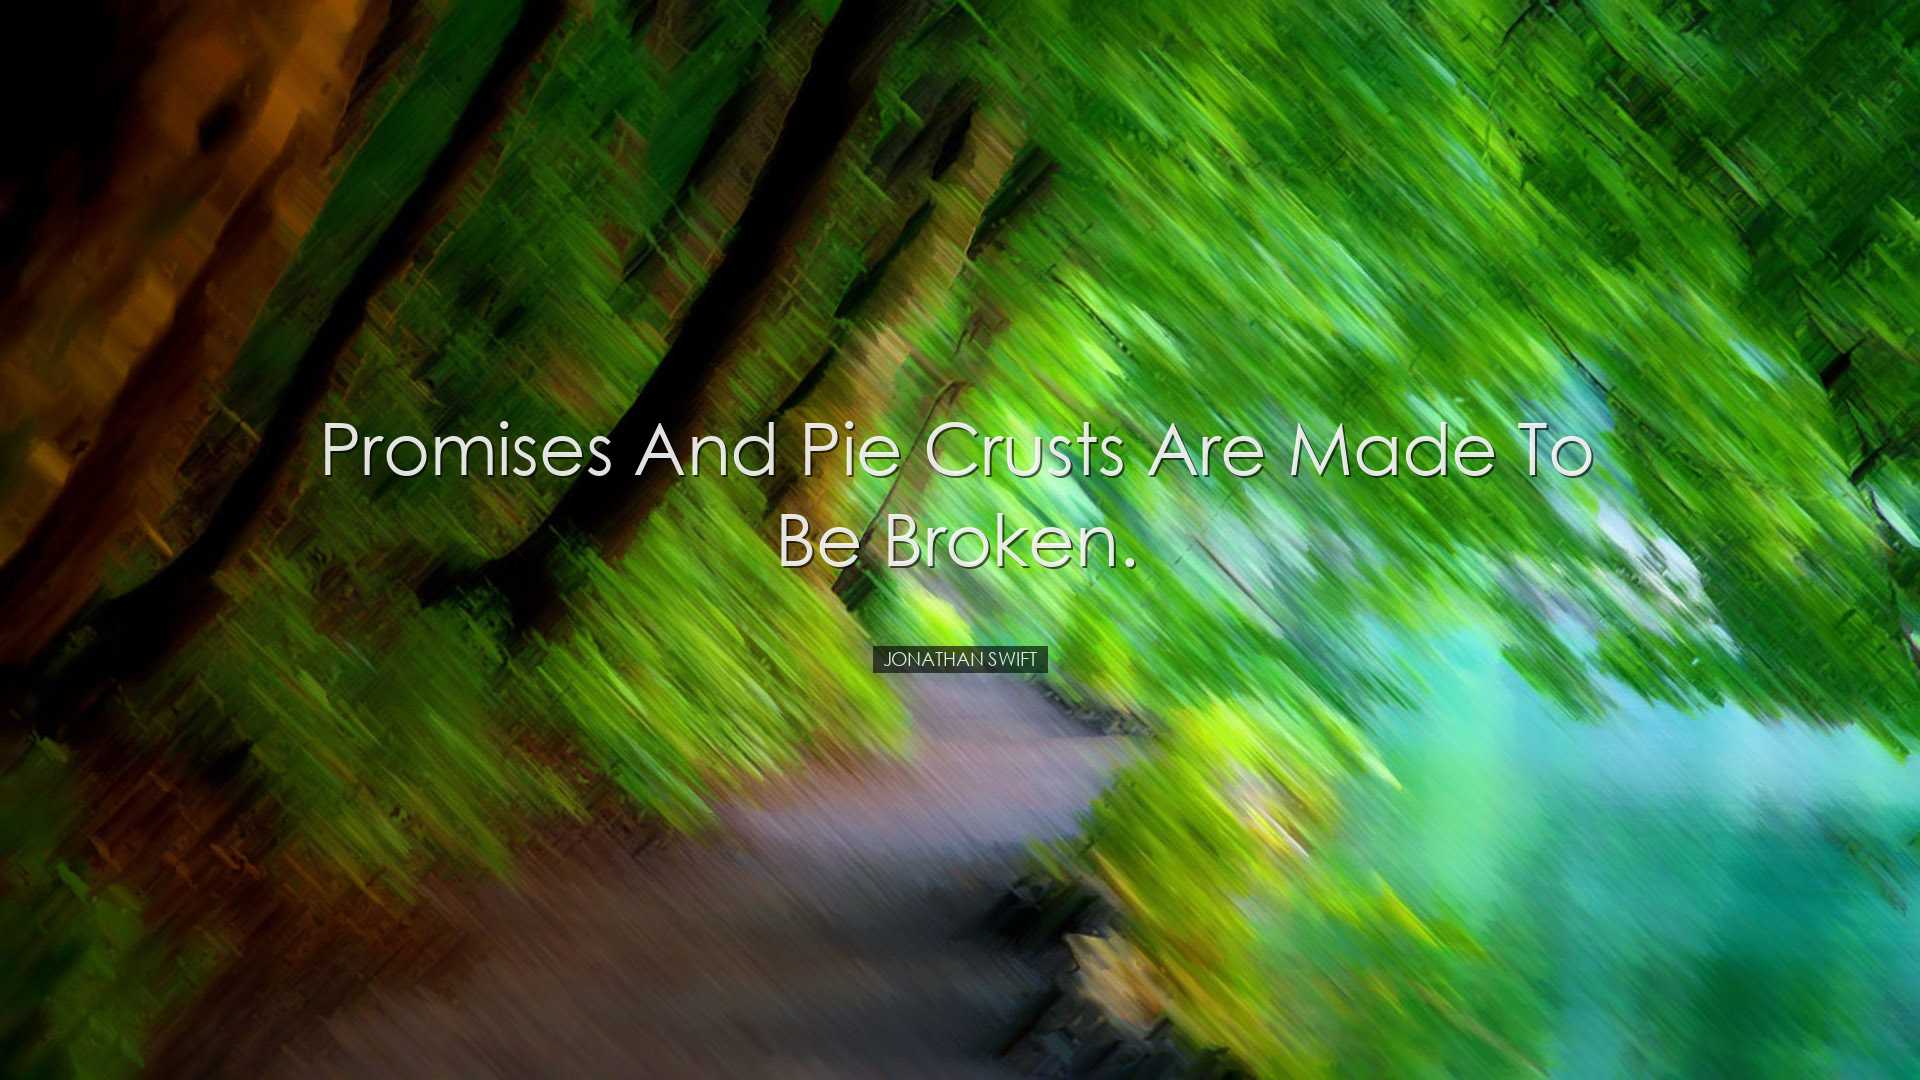 Promises and pie crusts are made to be broken. - Jonathan Swift